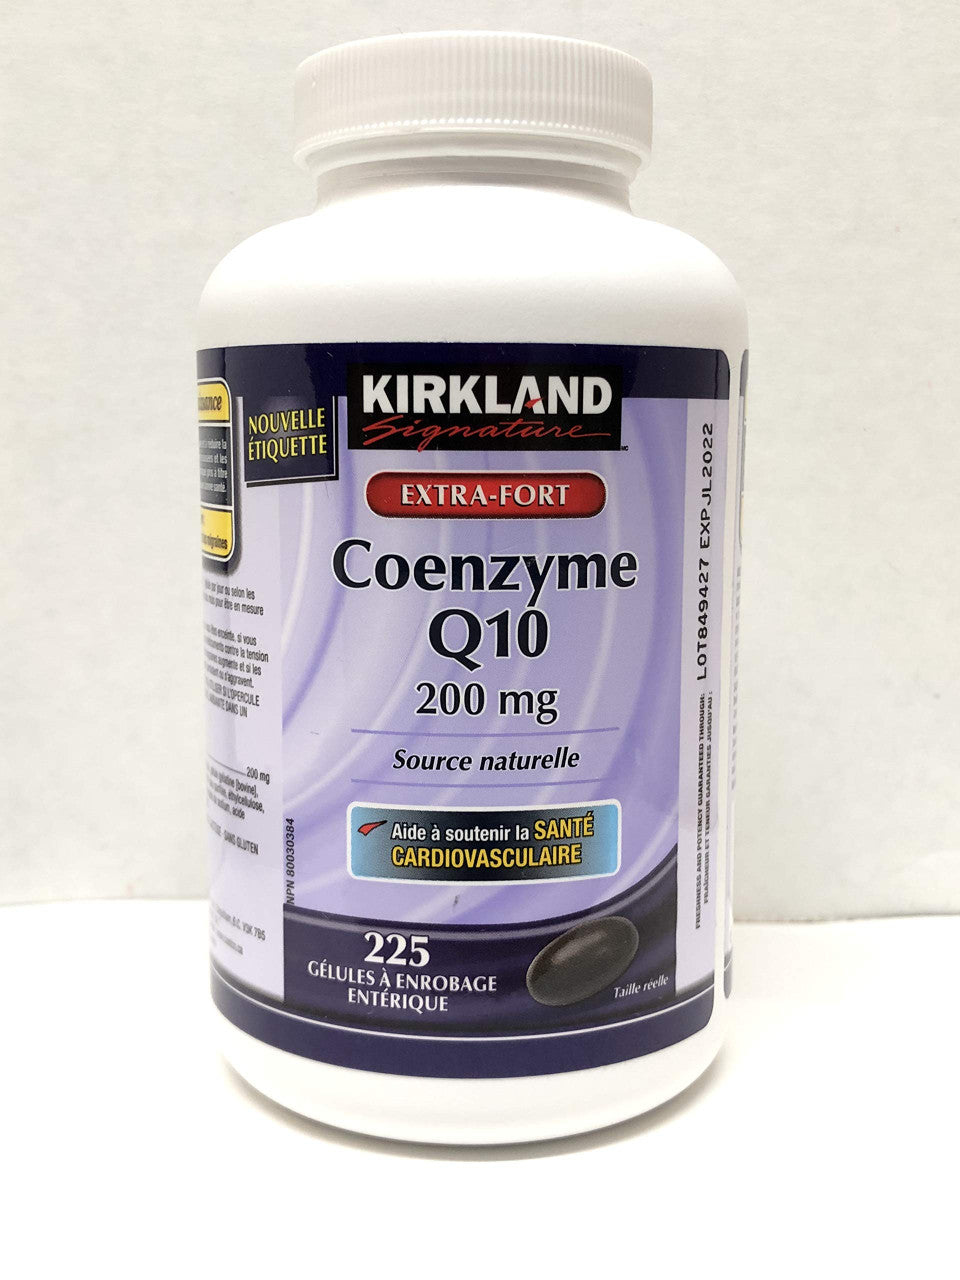 Kirkland Coenzyme Q10 200 mg, 225 Clear Enteric Softgels {Imported from Canada}